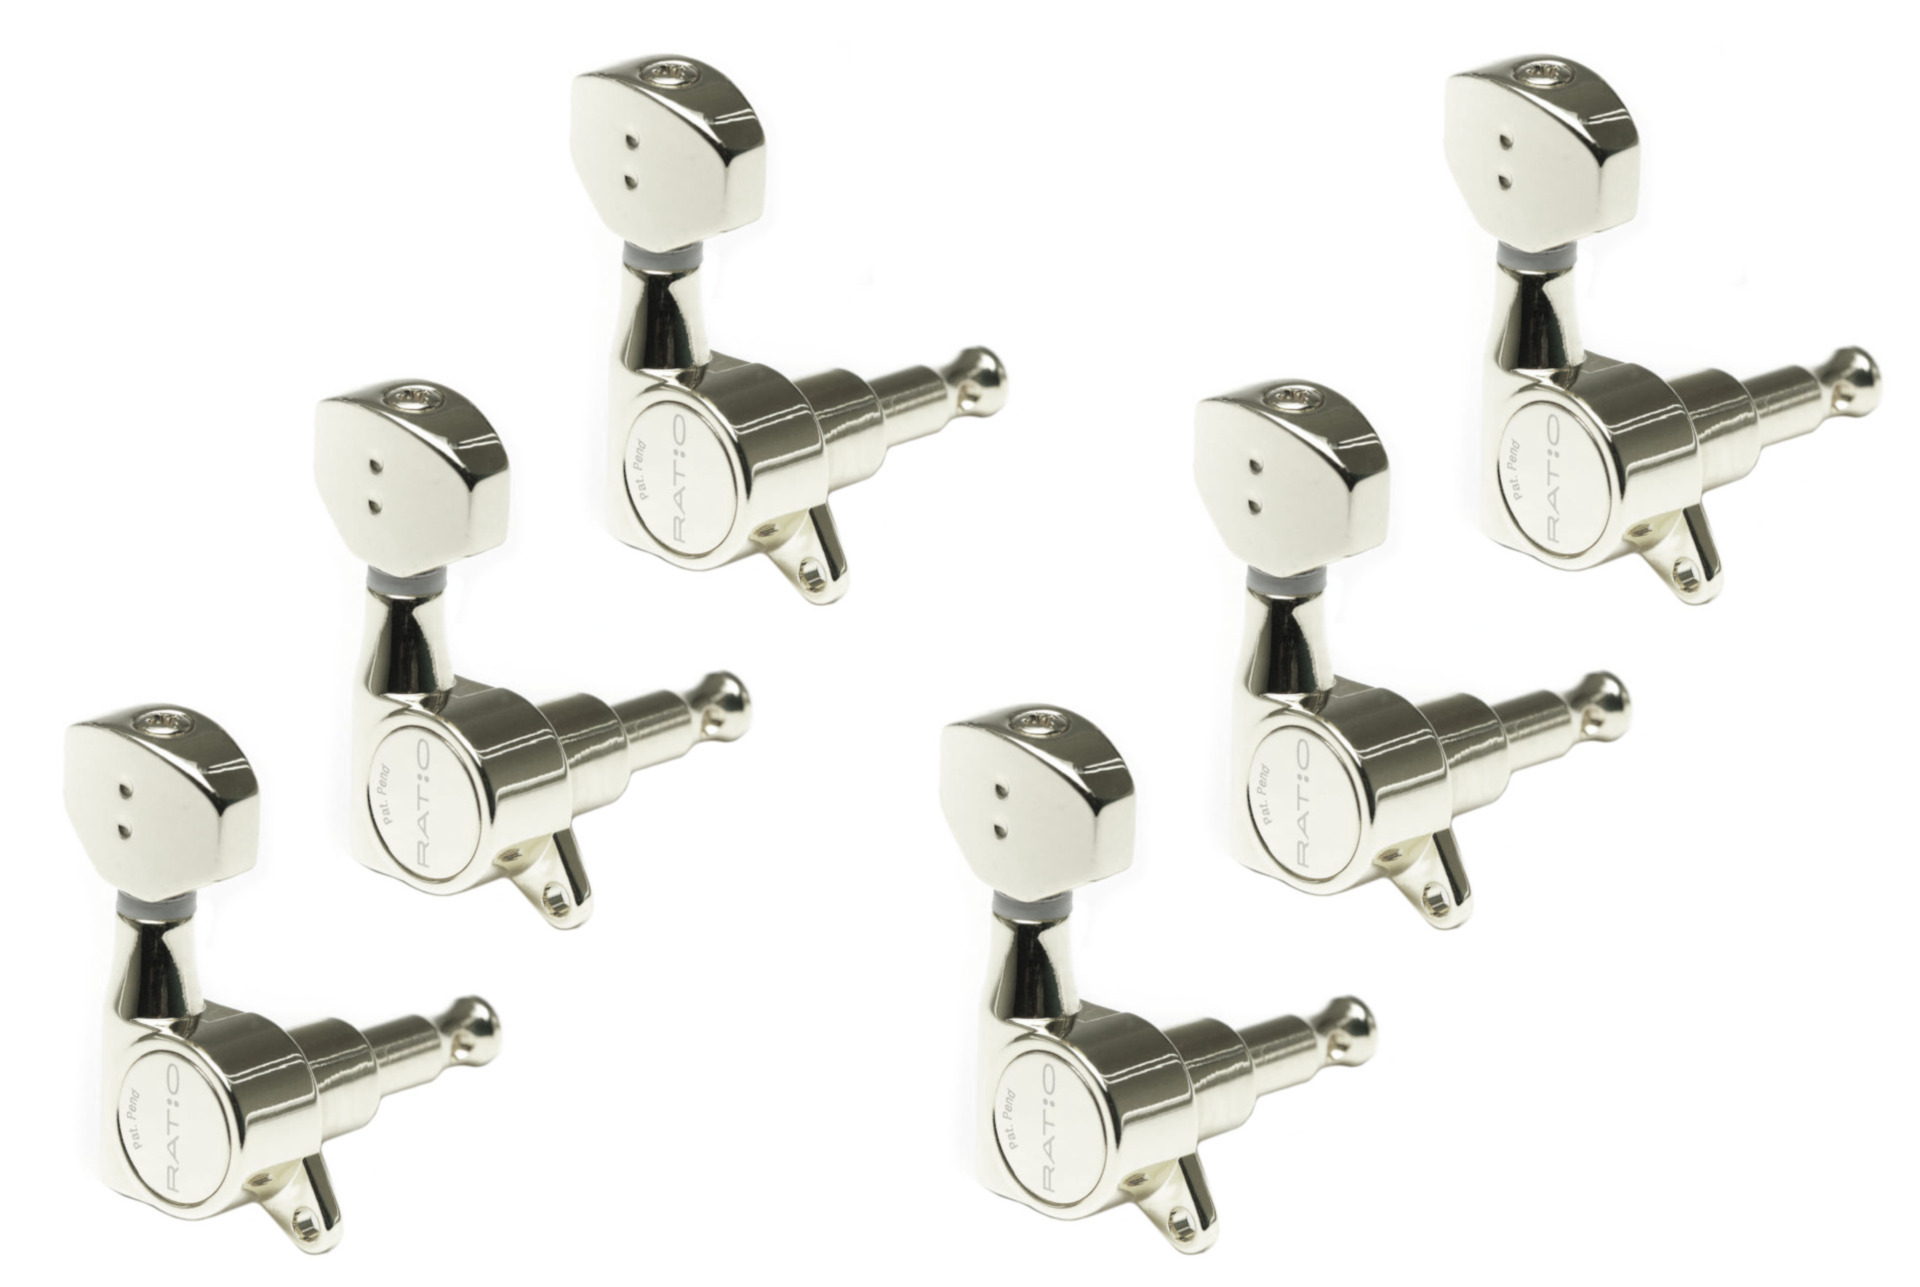 Graph Tech PRN-4721-C0 Ratio Electric Guitar Machine Heads with Mini Contemporary Button, Offset Screw - 6-in-Line, Bass Side (Left) - Chrome